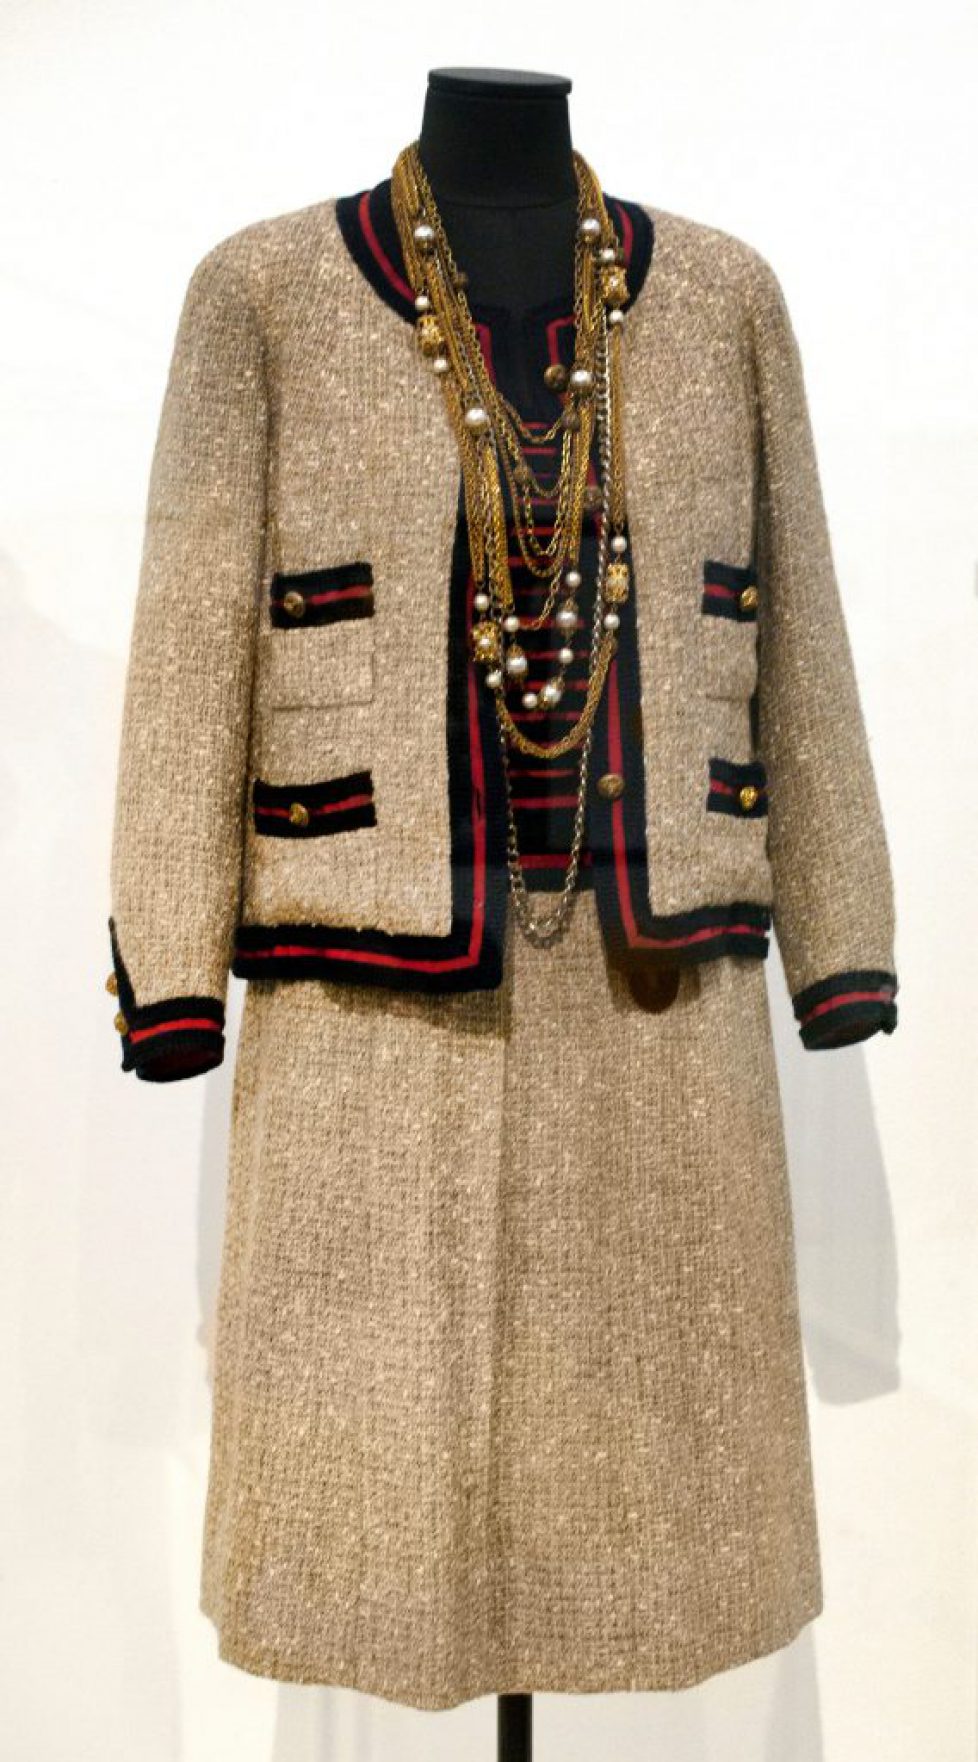 Gabrielle 1960 The garment worn by Queen Paola of Belgium Coco Chanel 1883 ? 1971 French fashion designer